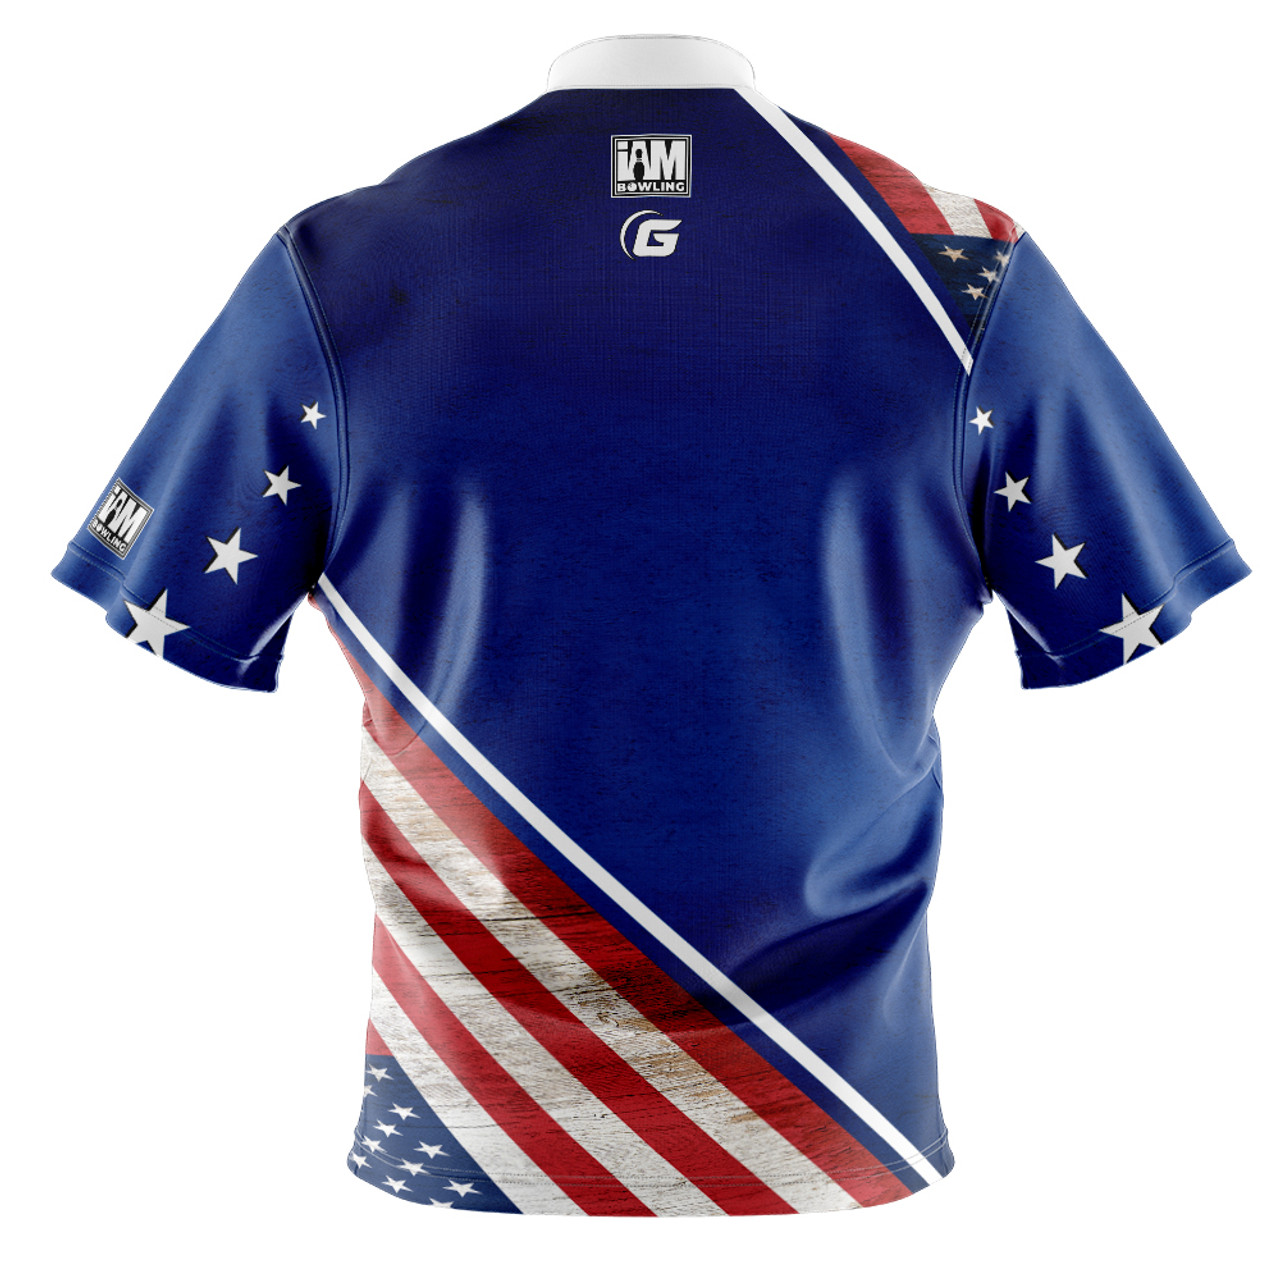 900 Global DS Bowling Jersey - Design 2029-9G